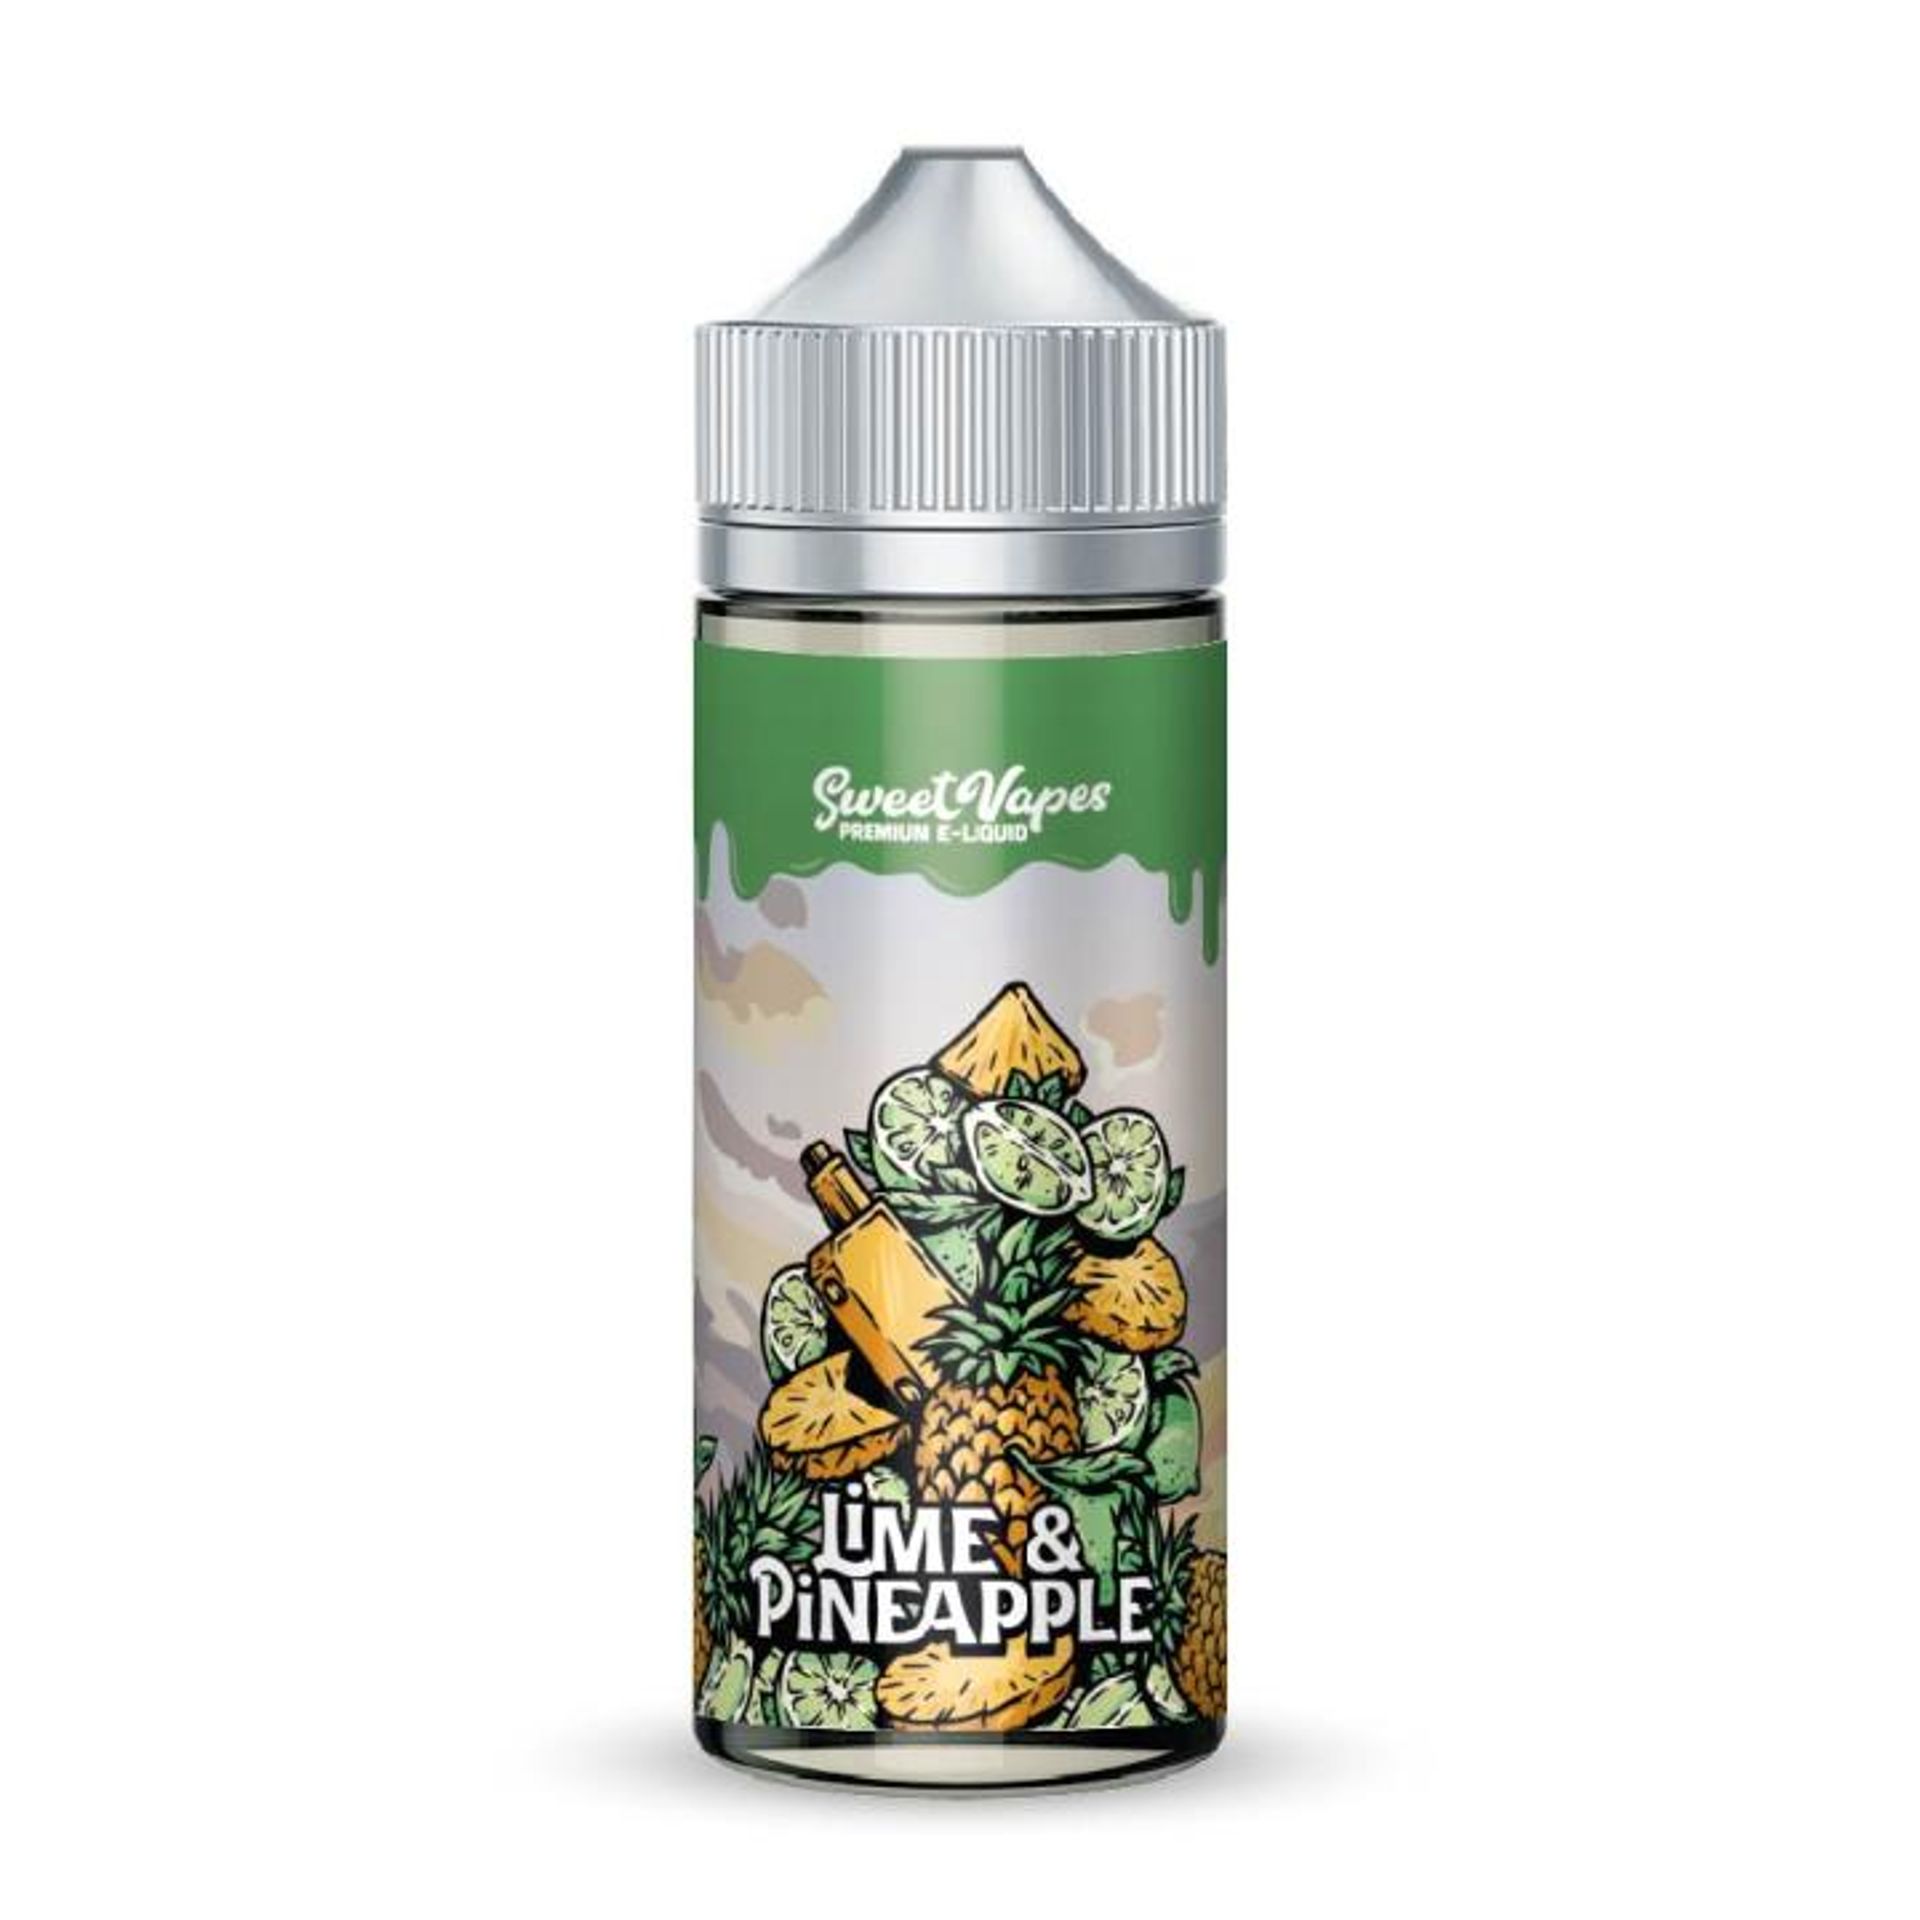 Image of Lime And Pineapple by Sweet Vapes